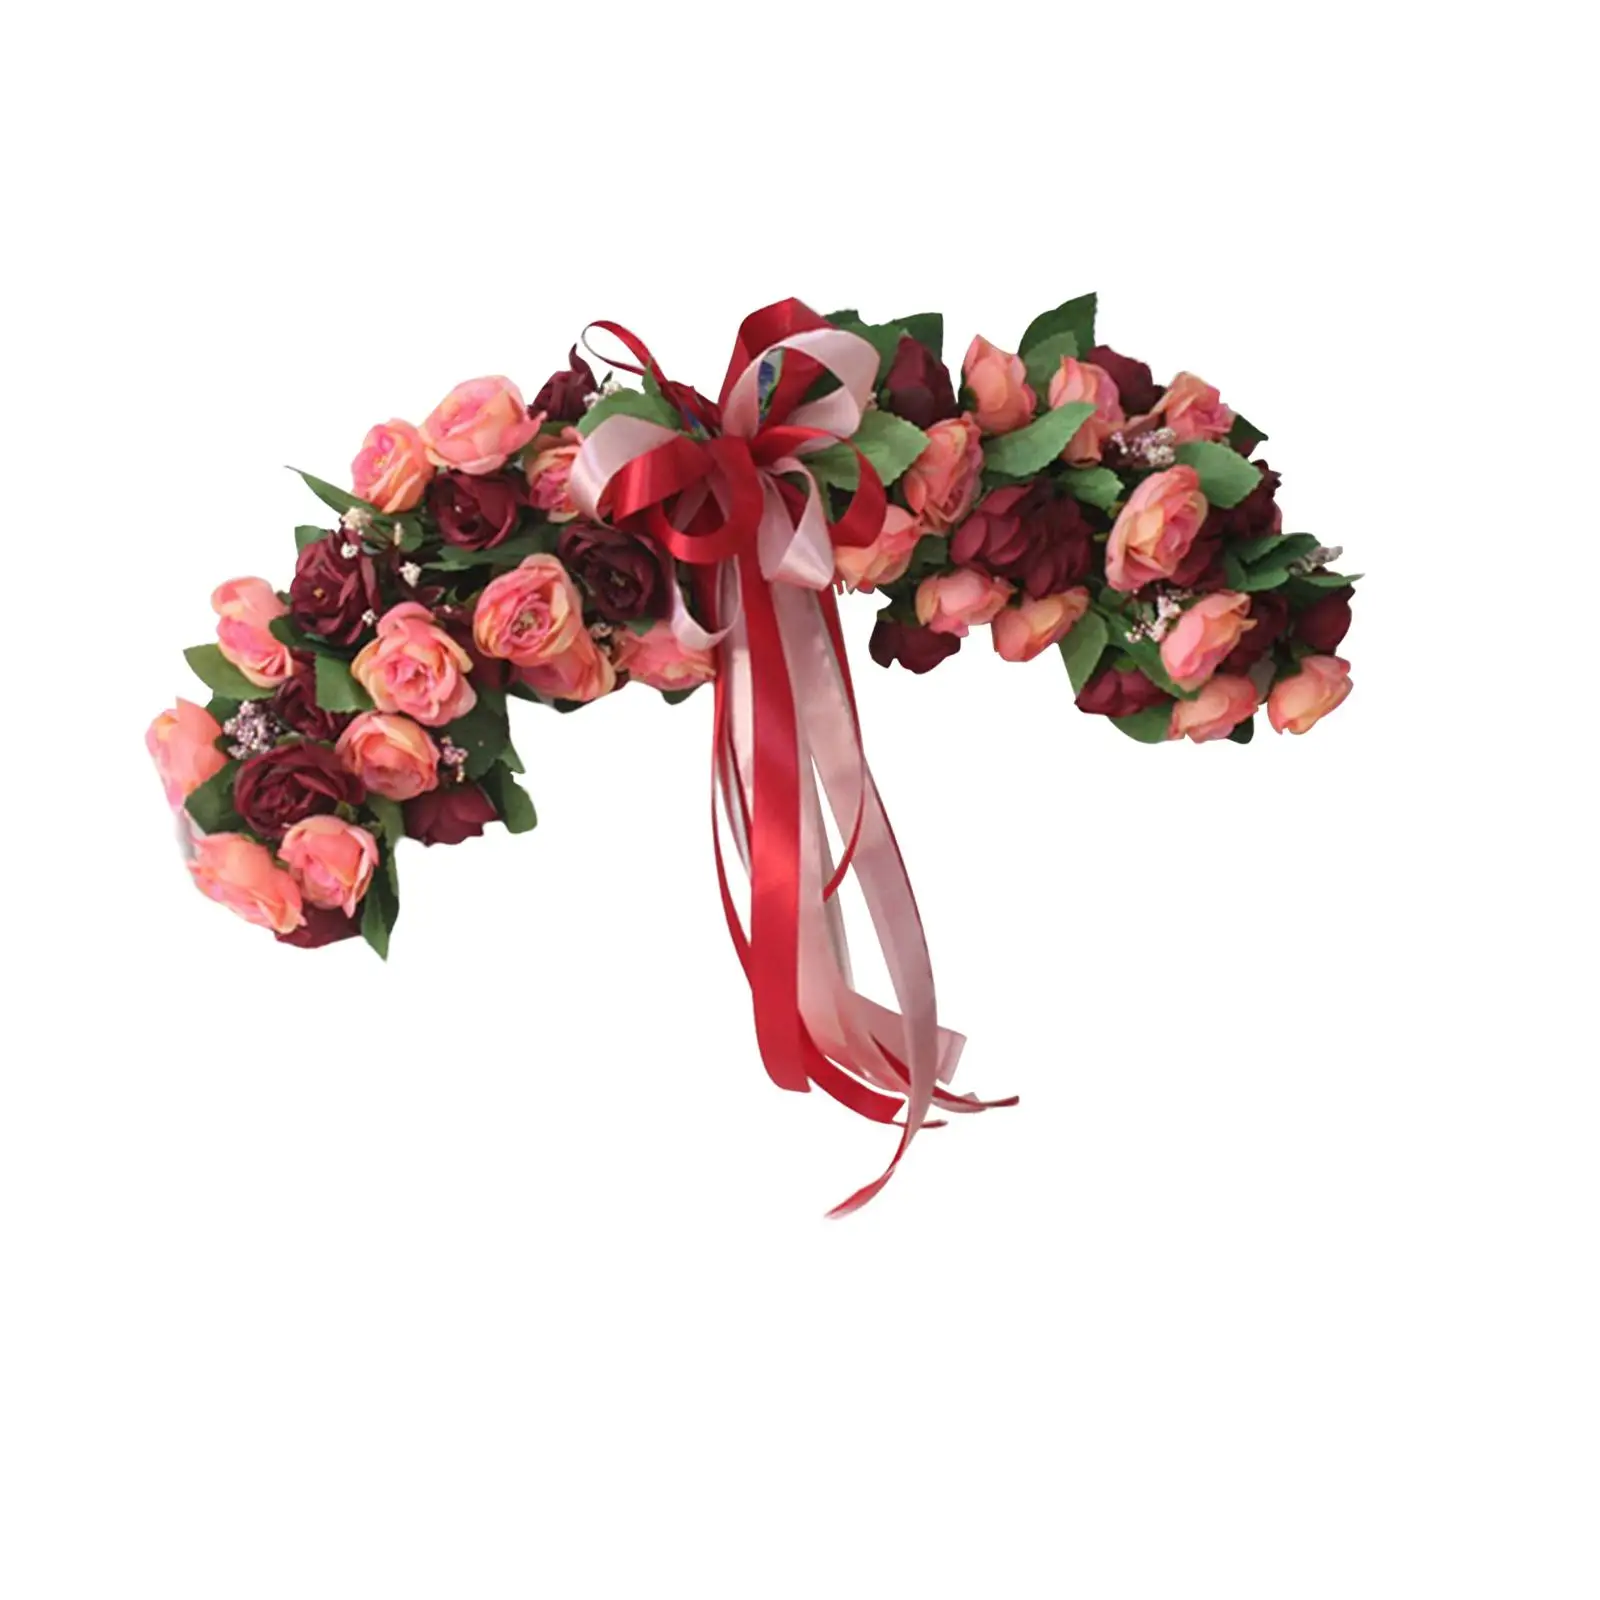 50cm Wedding Arch Flowers Hanging Artificial Rose Floral Swag Garland Door Wreath for Backdrop Party Window Holiday Decor